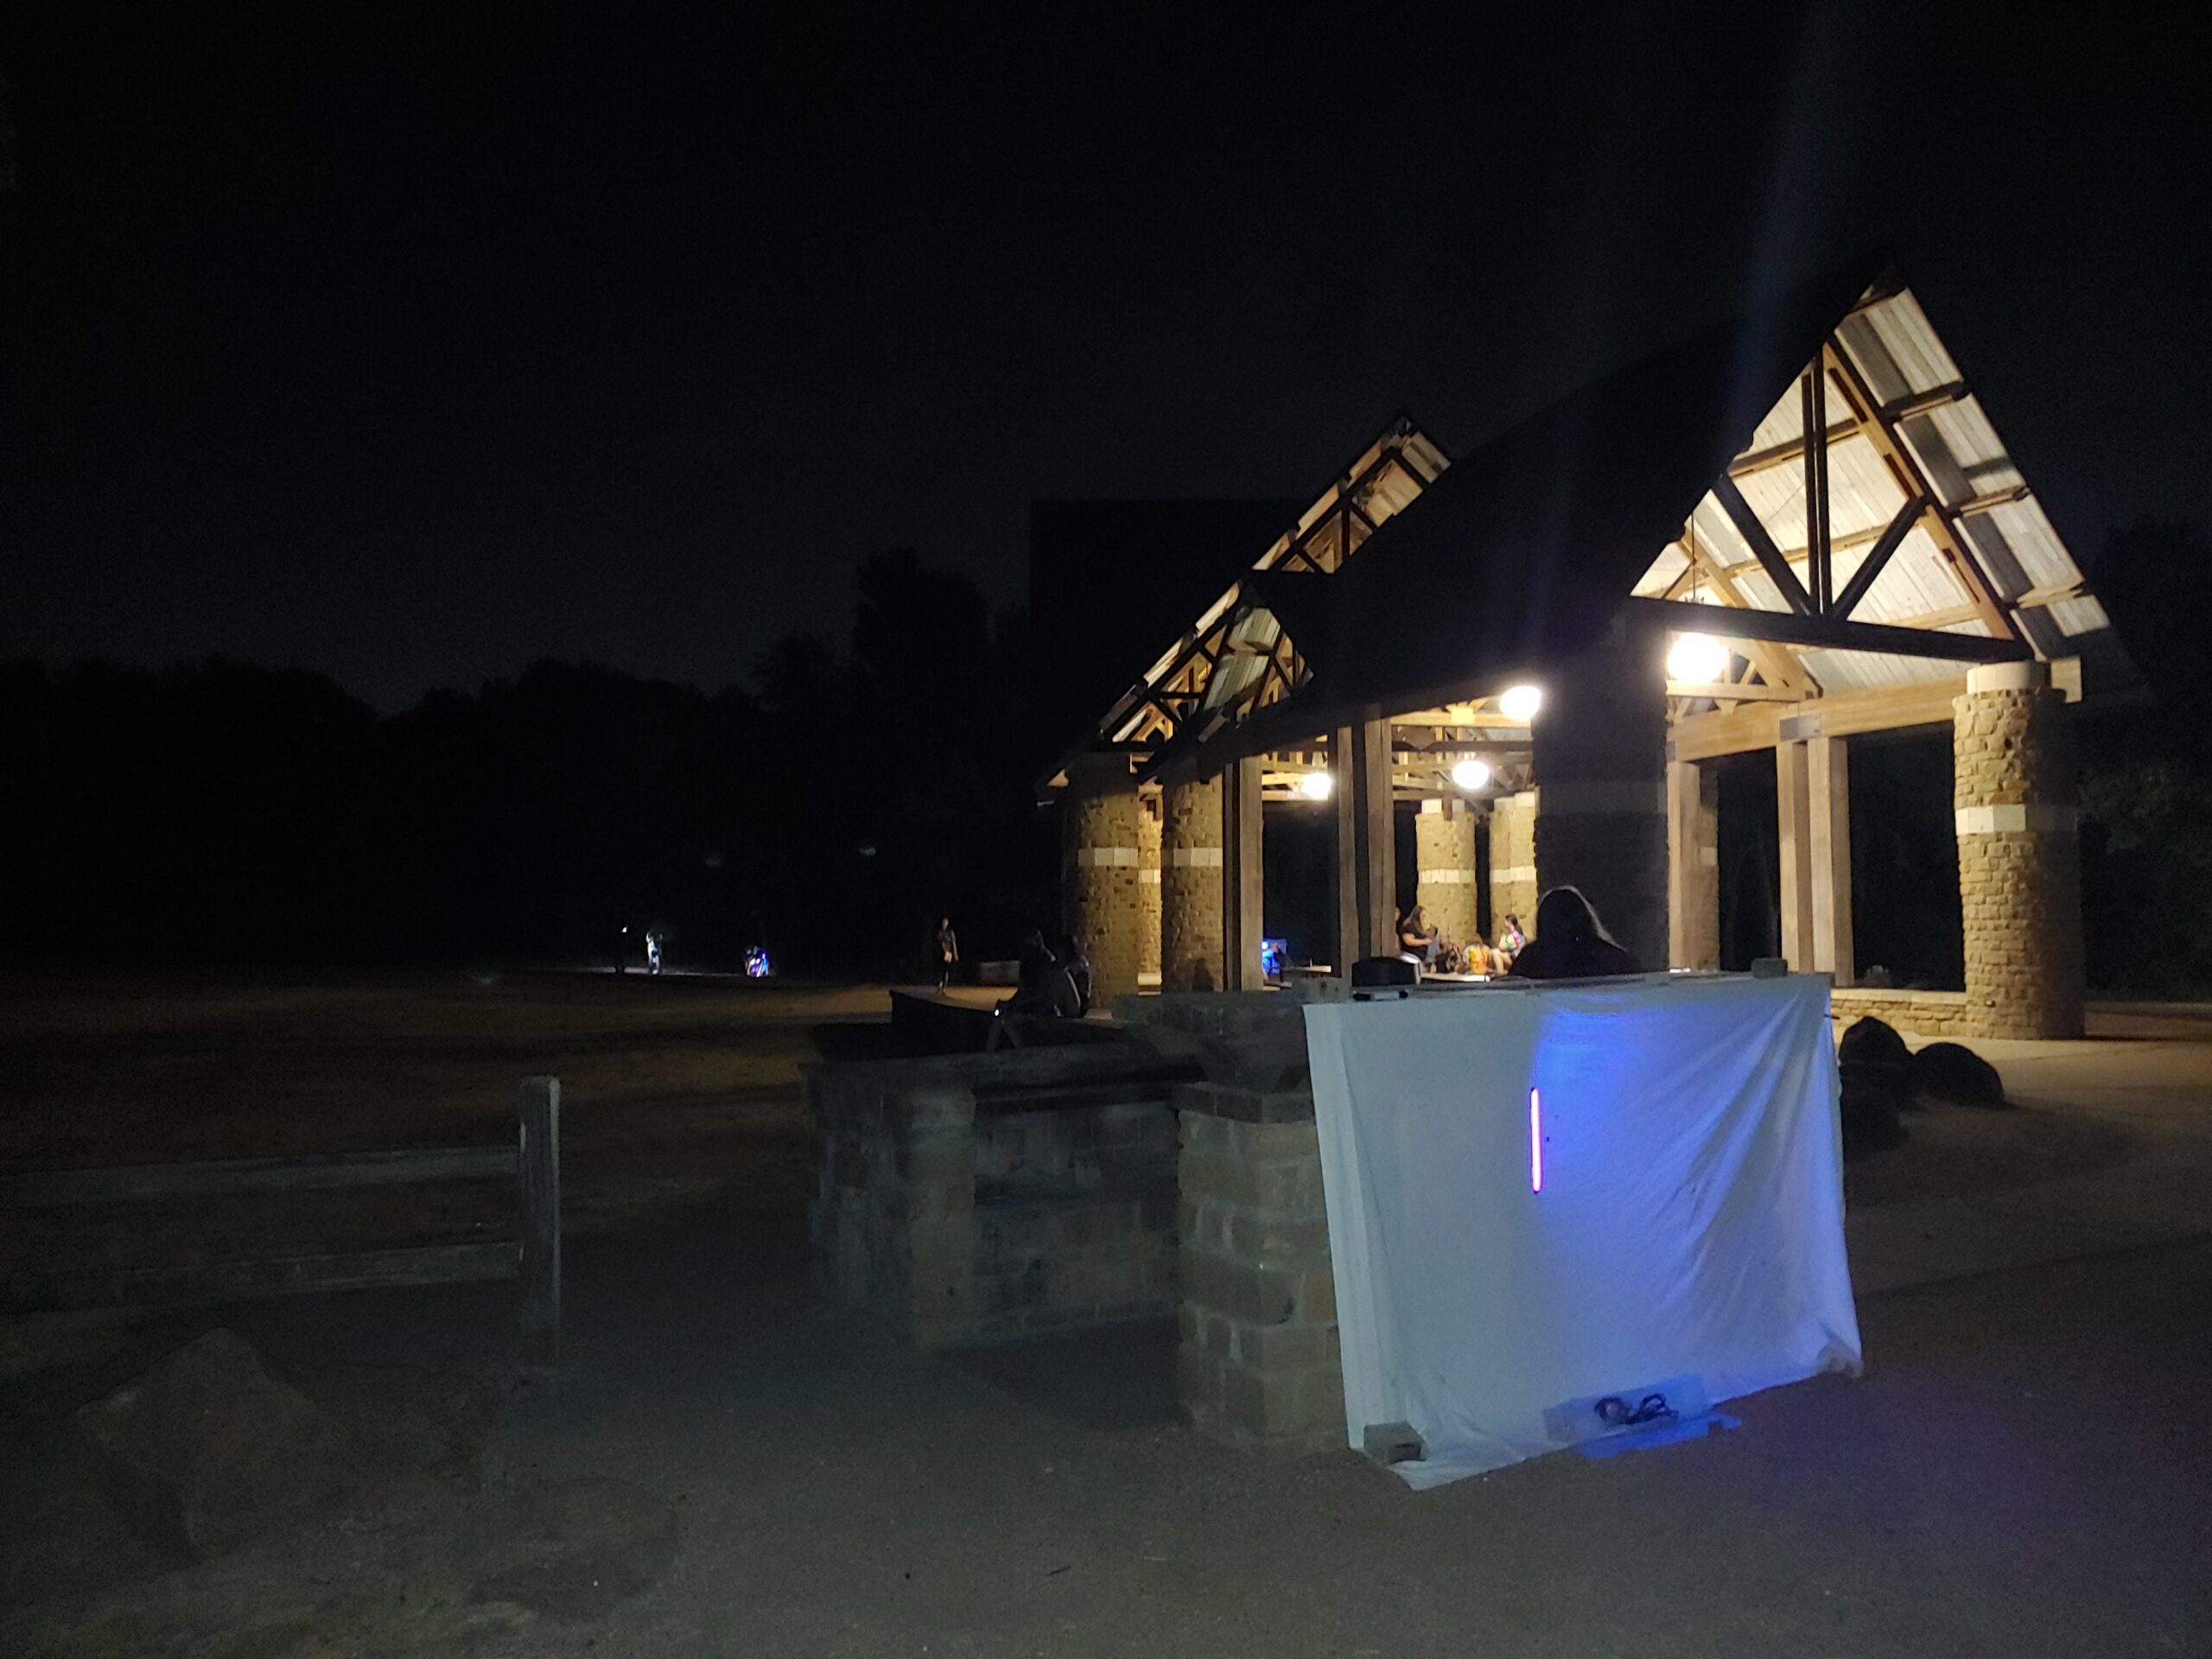 A dark park at night, with a lit shelter in the background. In the foreground, there is a white sheet hung up with a blue night shining on it.